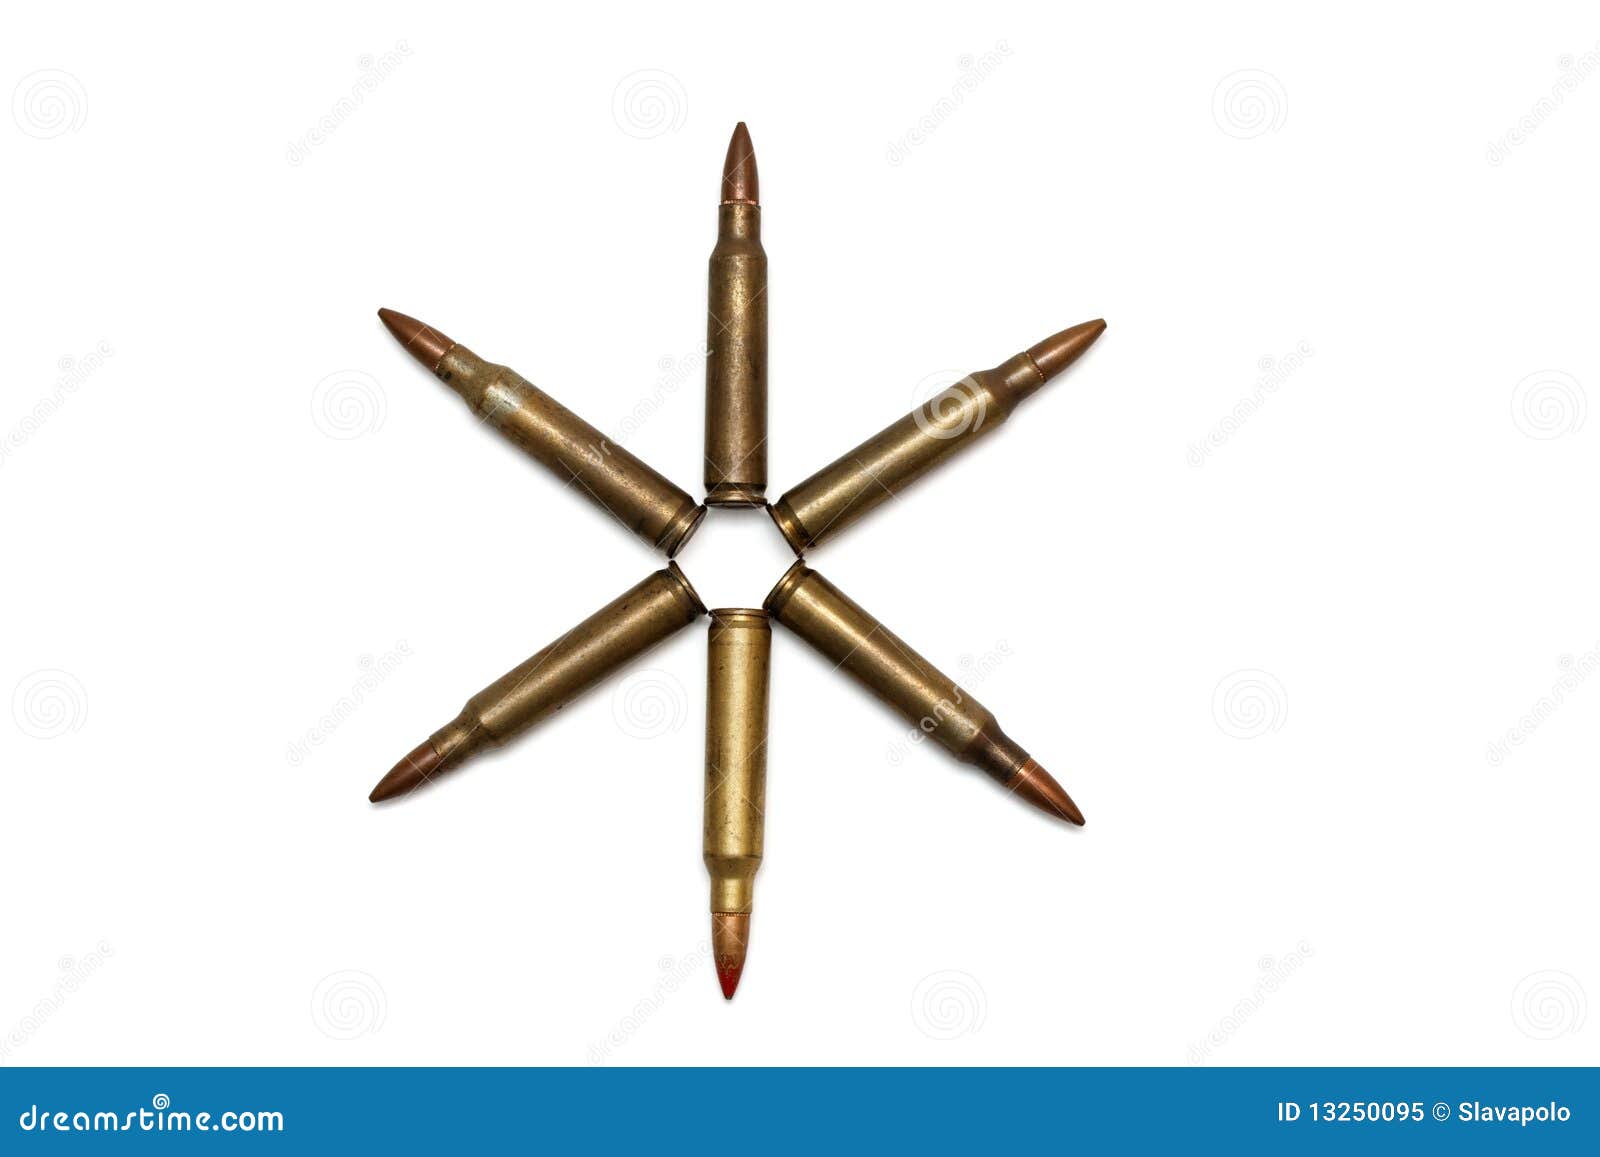 six-pointed star of m16 cartridges 